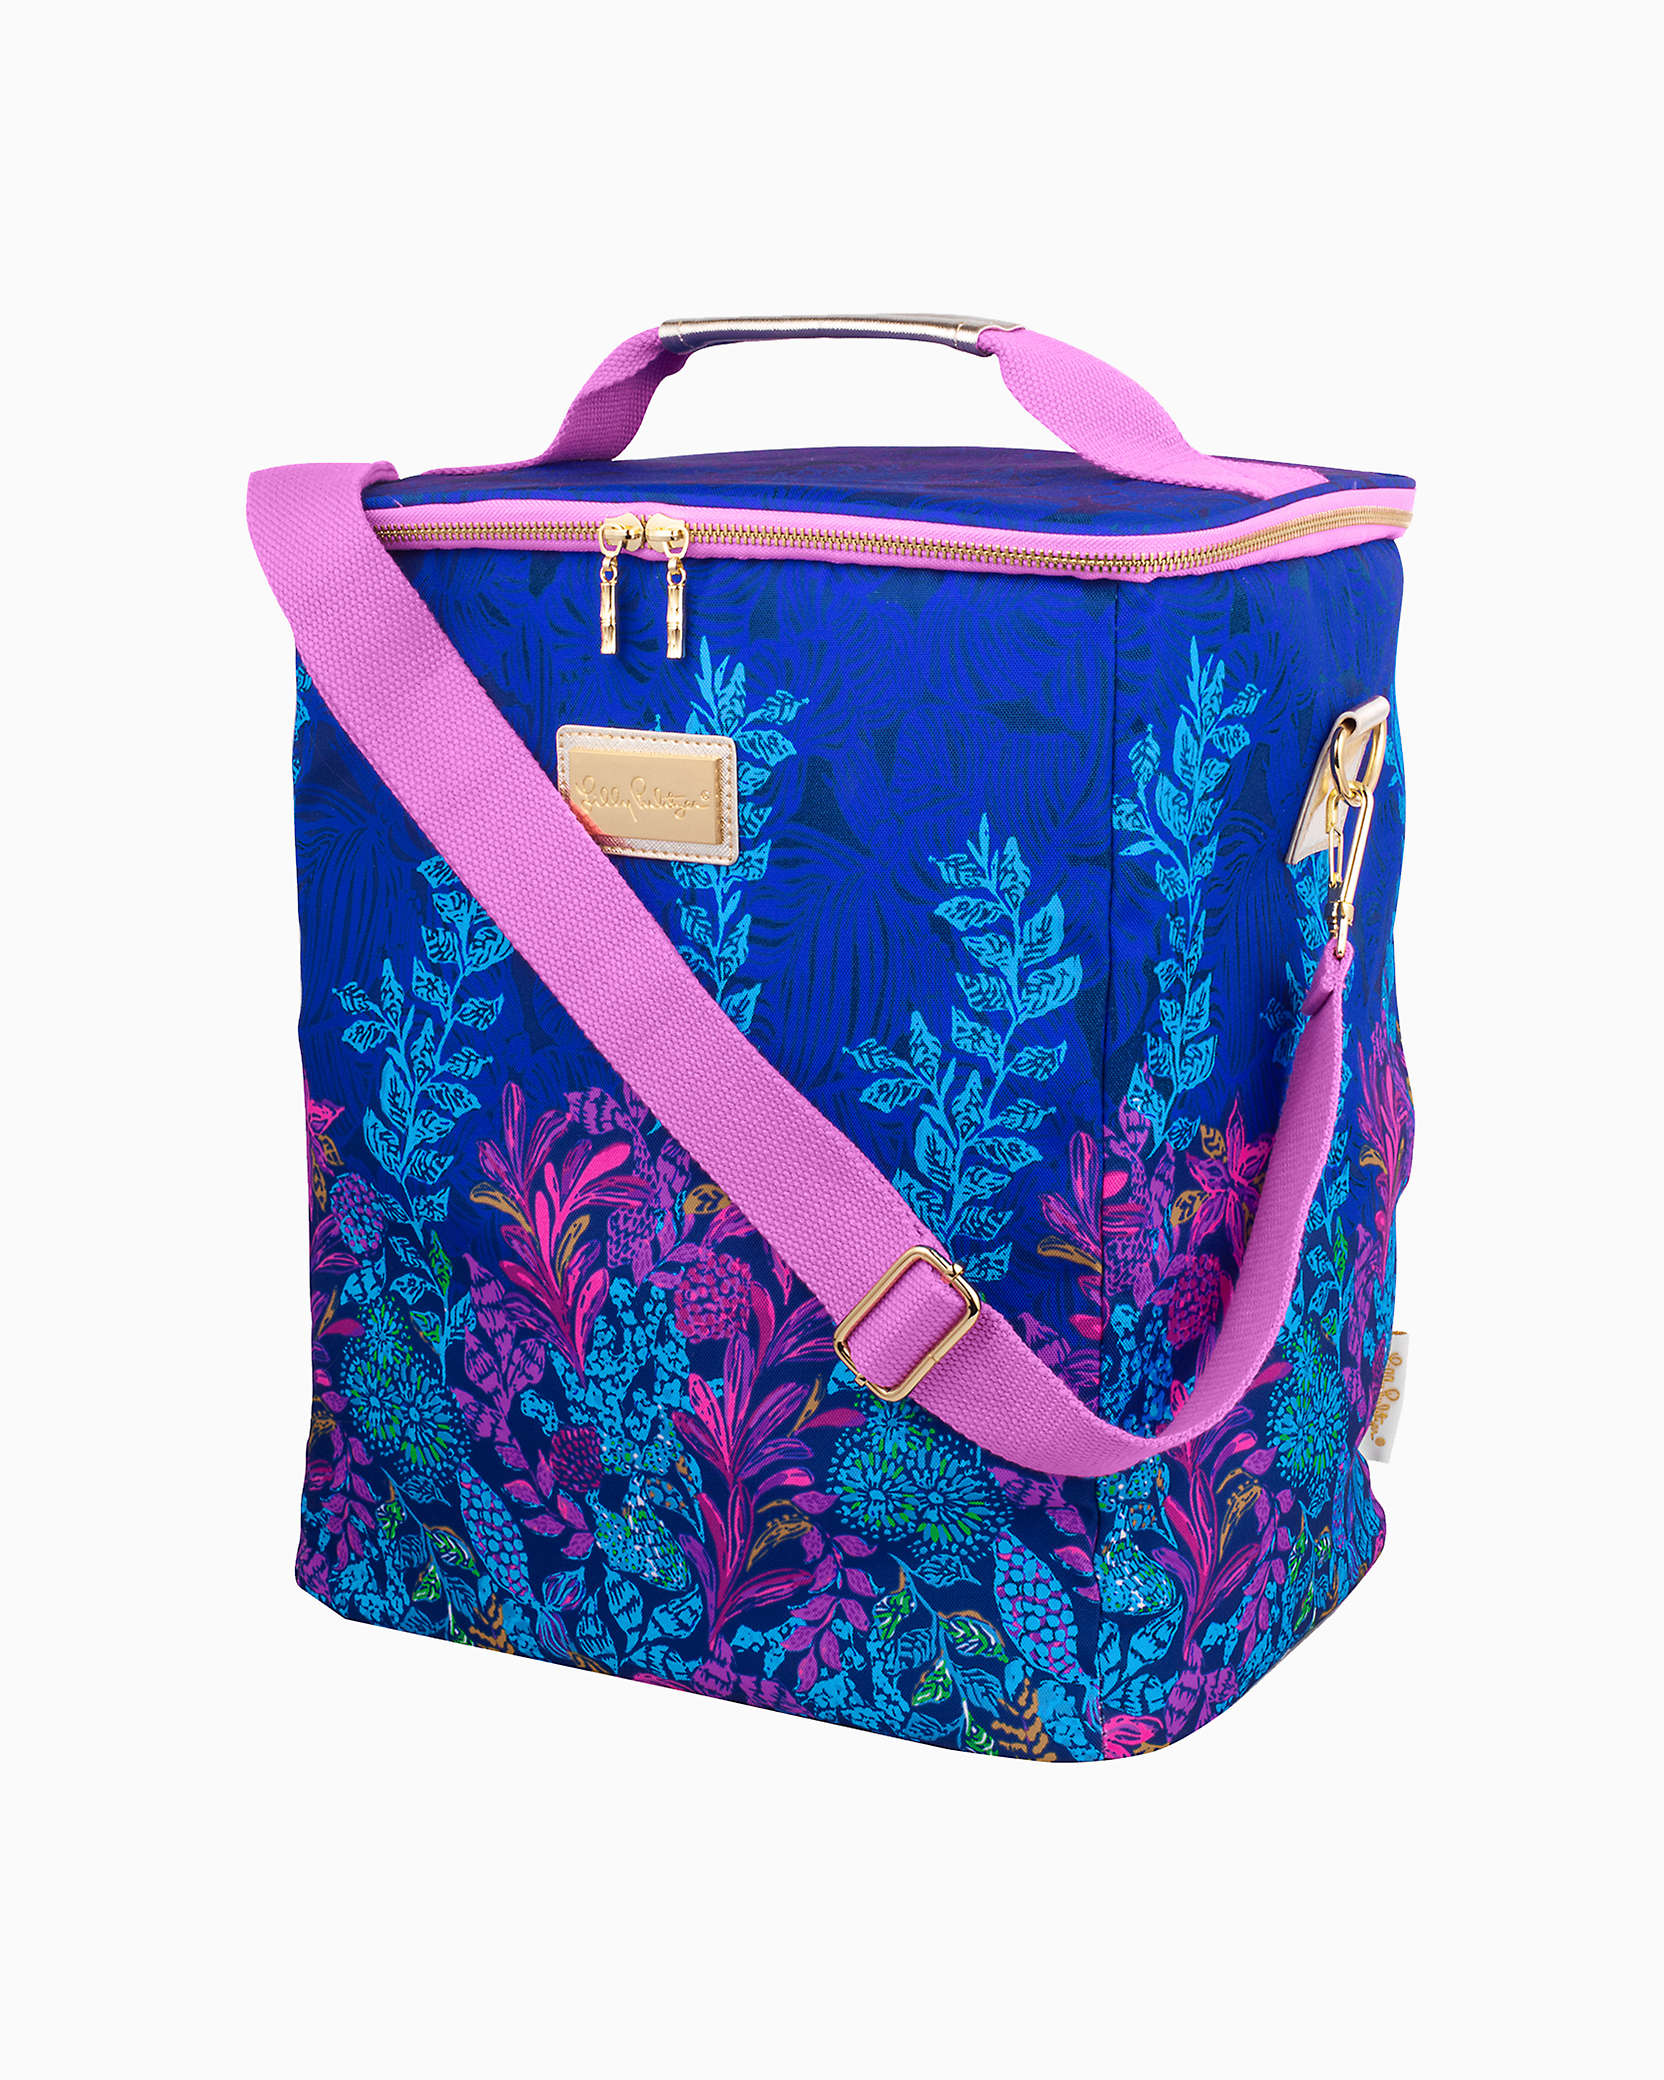 Lilly Pulitzer Insulated Wine Carrier In Aegean Navy Calypso Coast